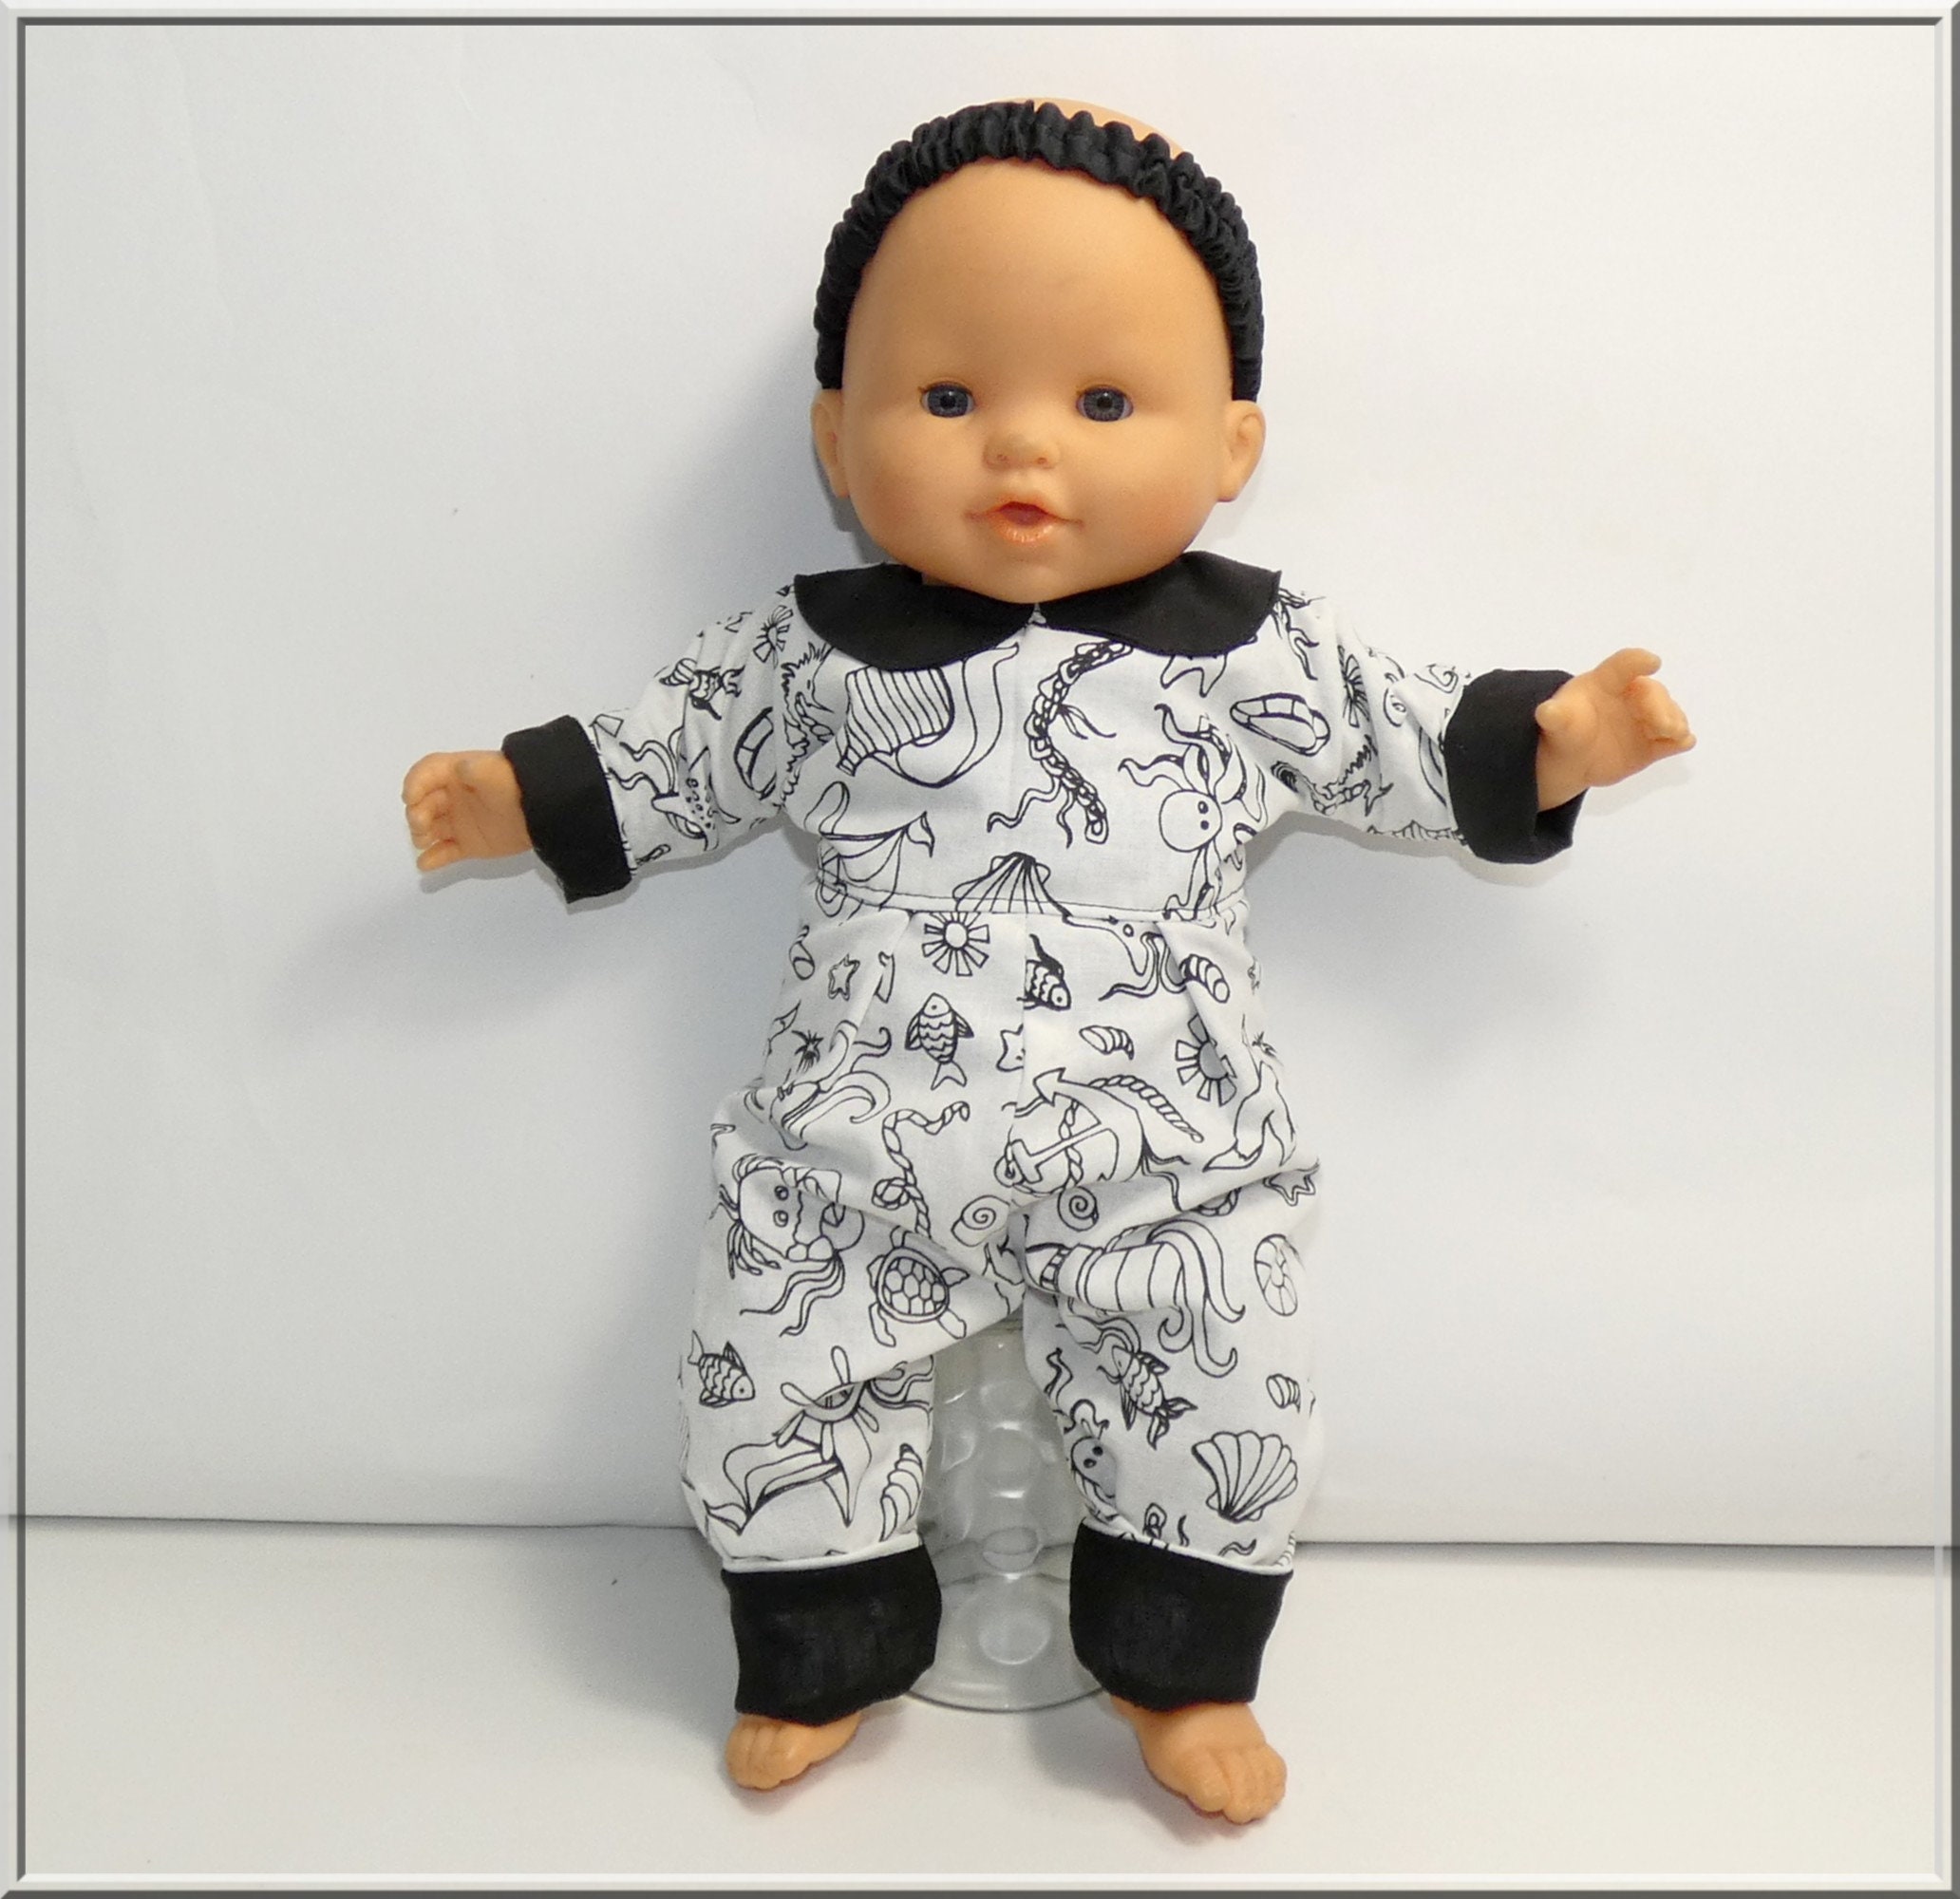 Complete Jumpsuit Outfit Jacket Headband for Corolle Doll 